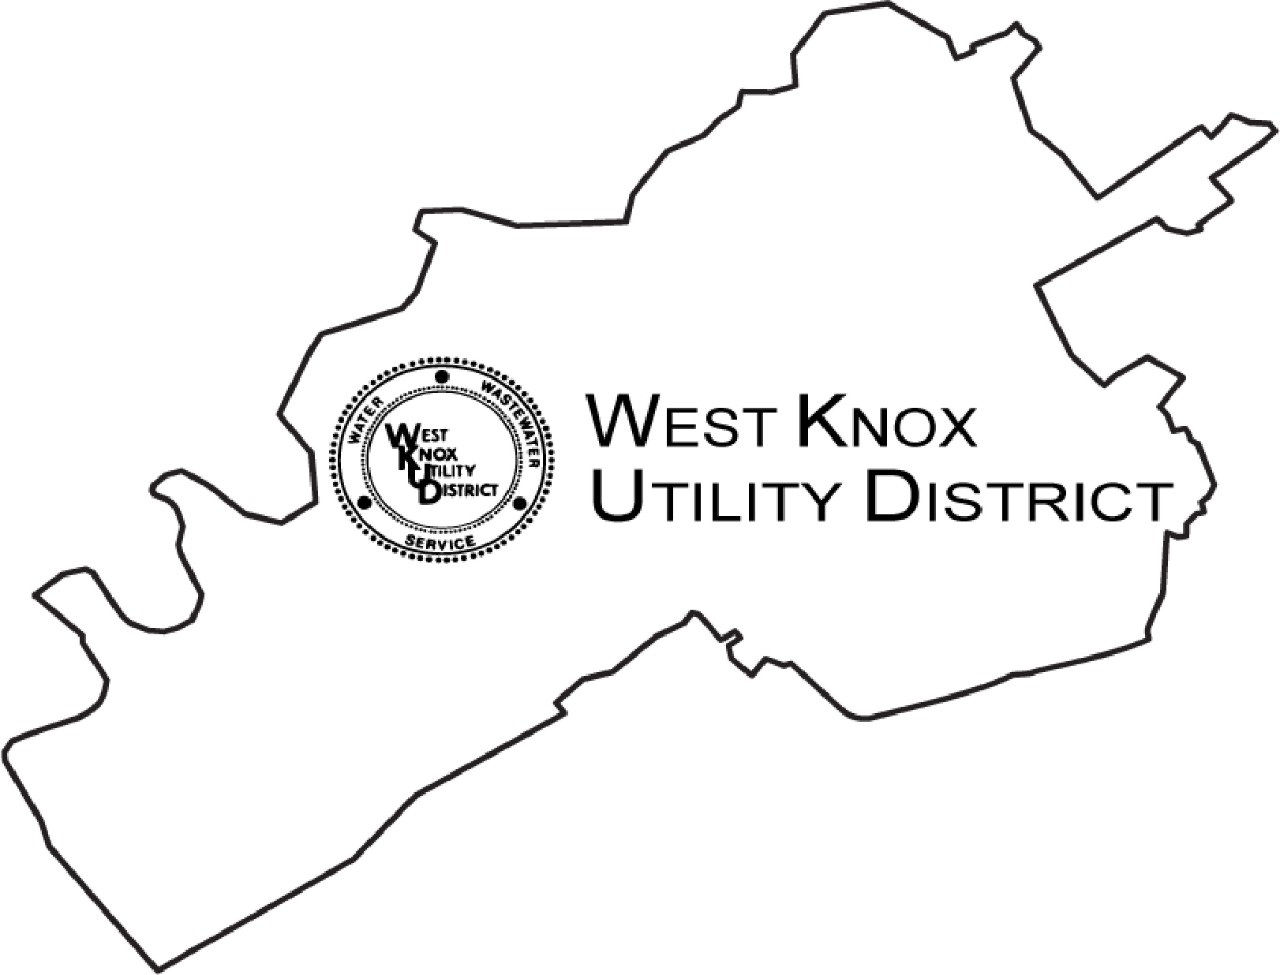 West Knox Utility District Career Opportunities